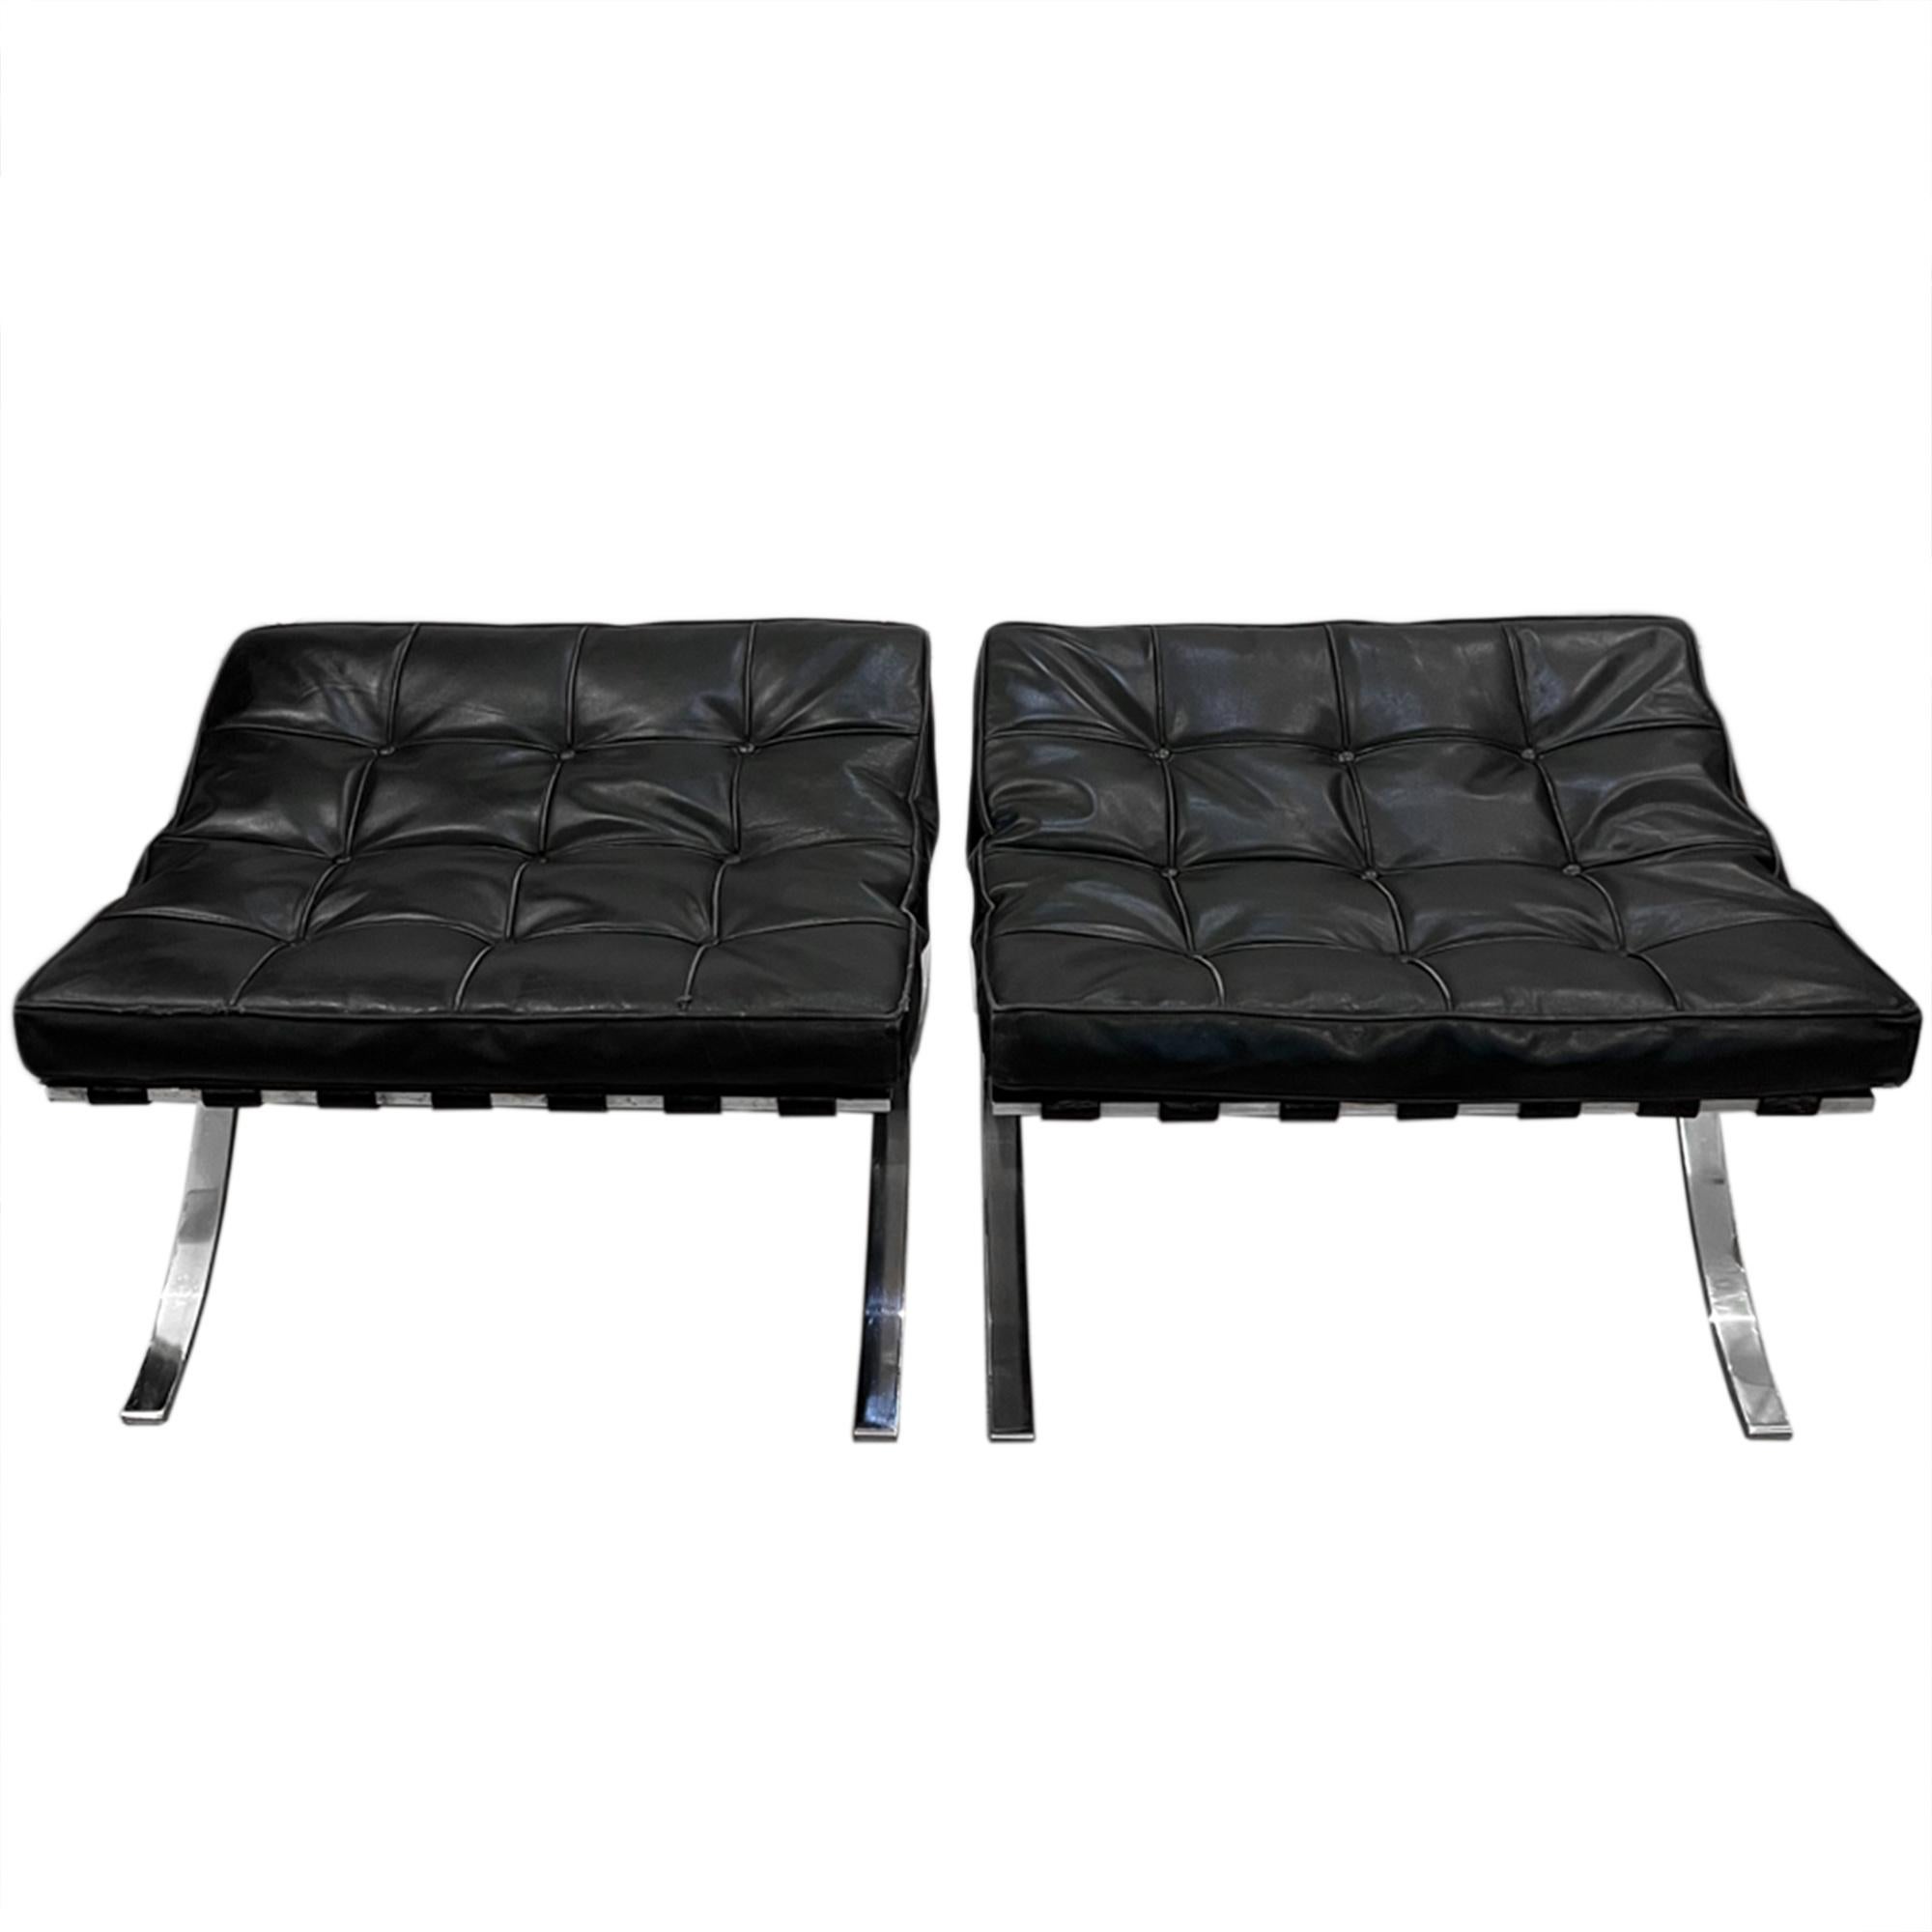 We’re selling these as a pair or individually - the timeless Classic Barcelona stool by Knoll.

We've replaced the latex filling in both seat pads. The wear on the leather cushions are consistent with their age - both are in good worn condition -